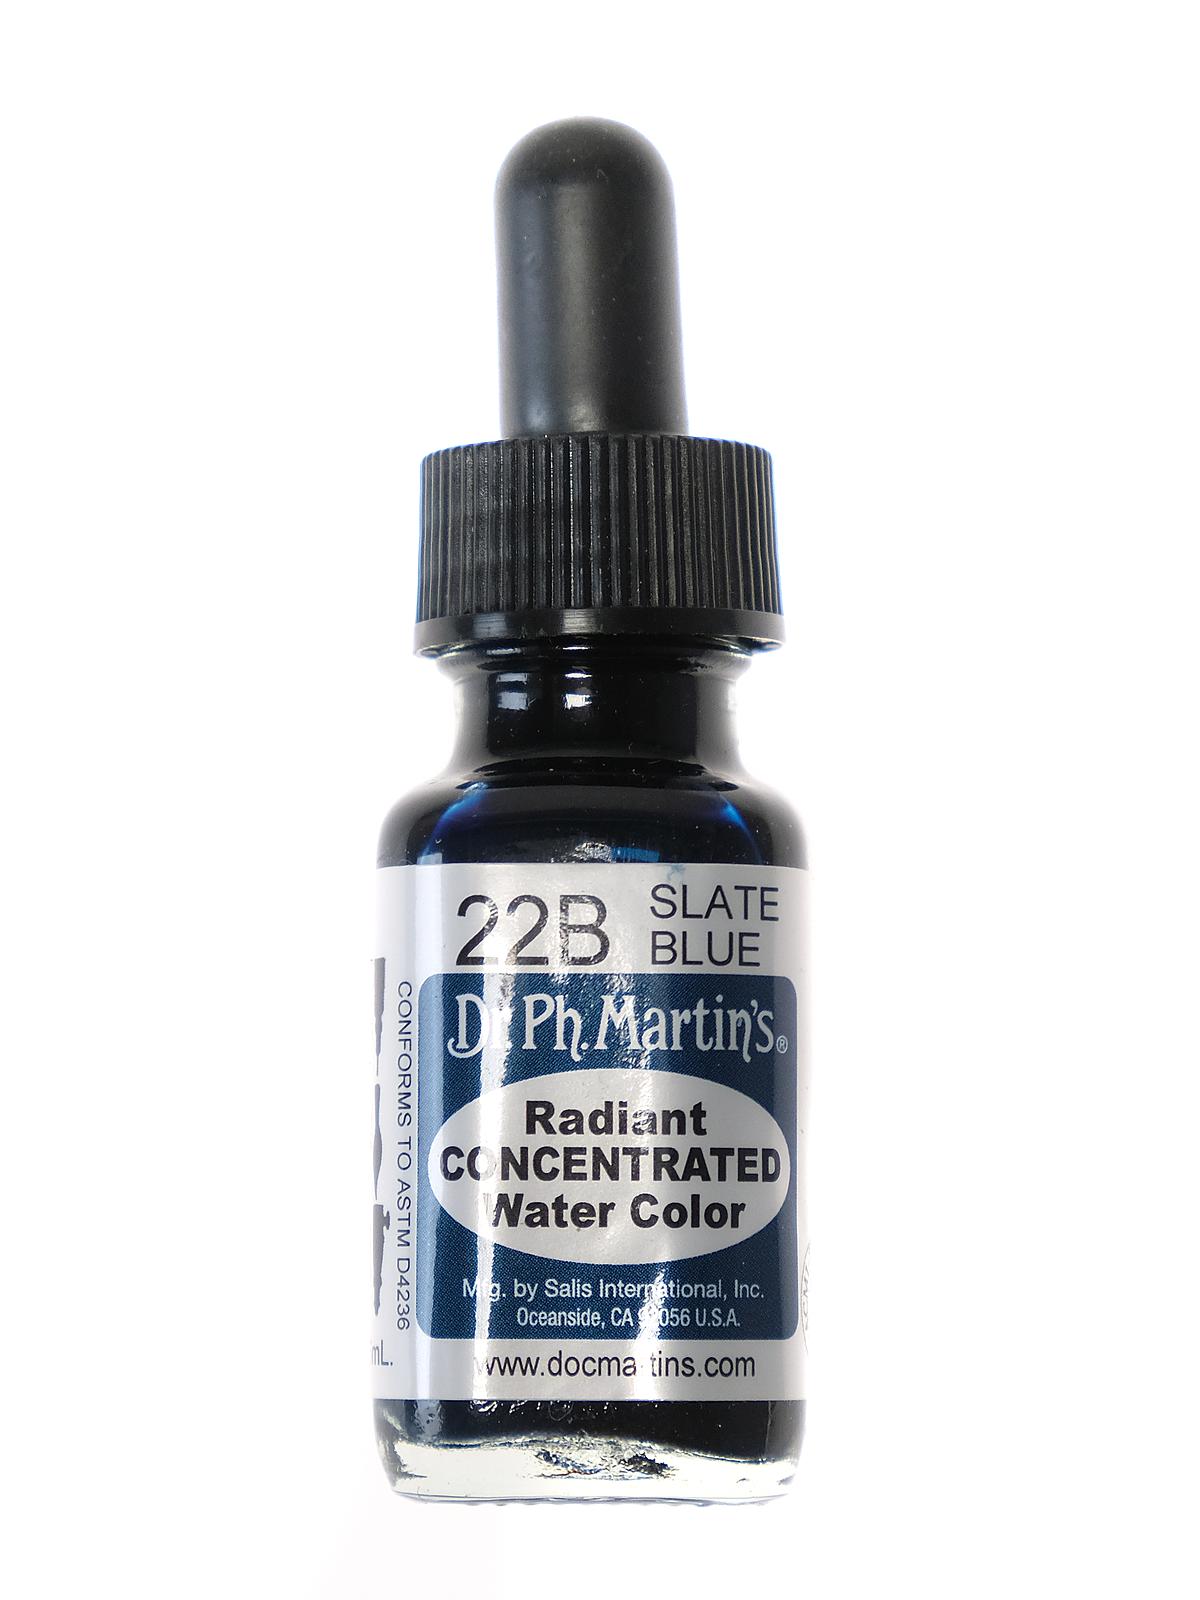 Radiant Concentrated Watercolors Slate Blue 1 2 Oz.